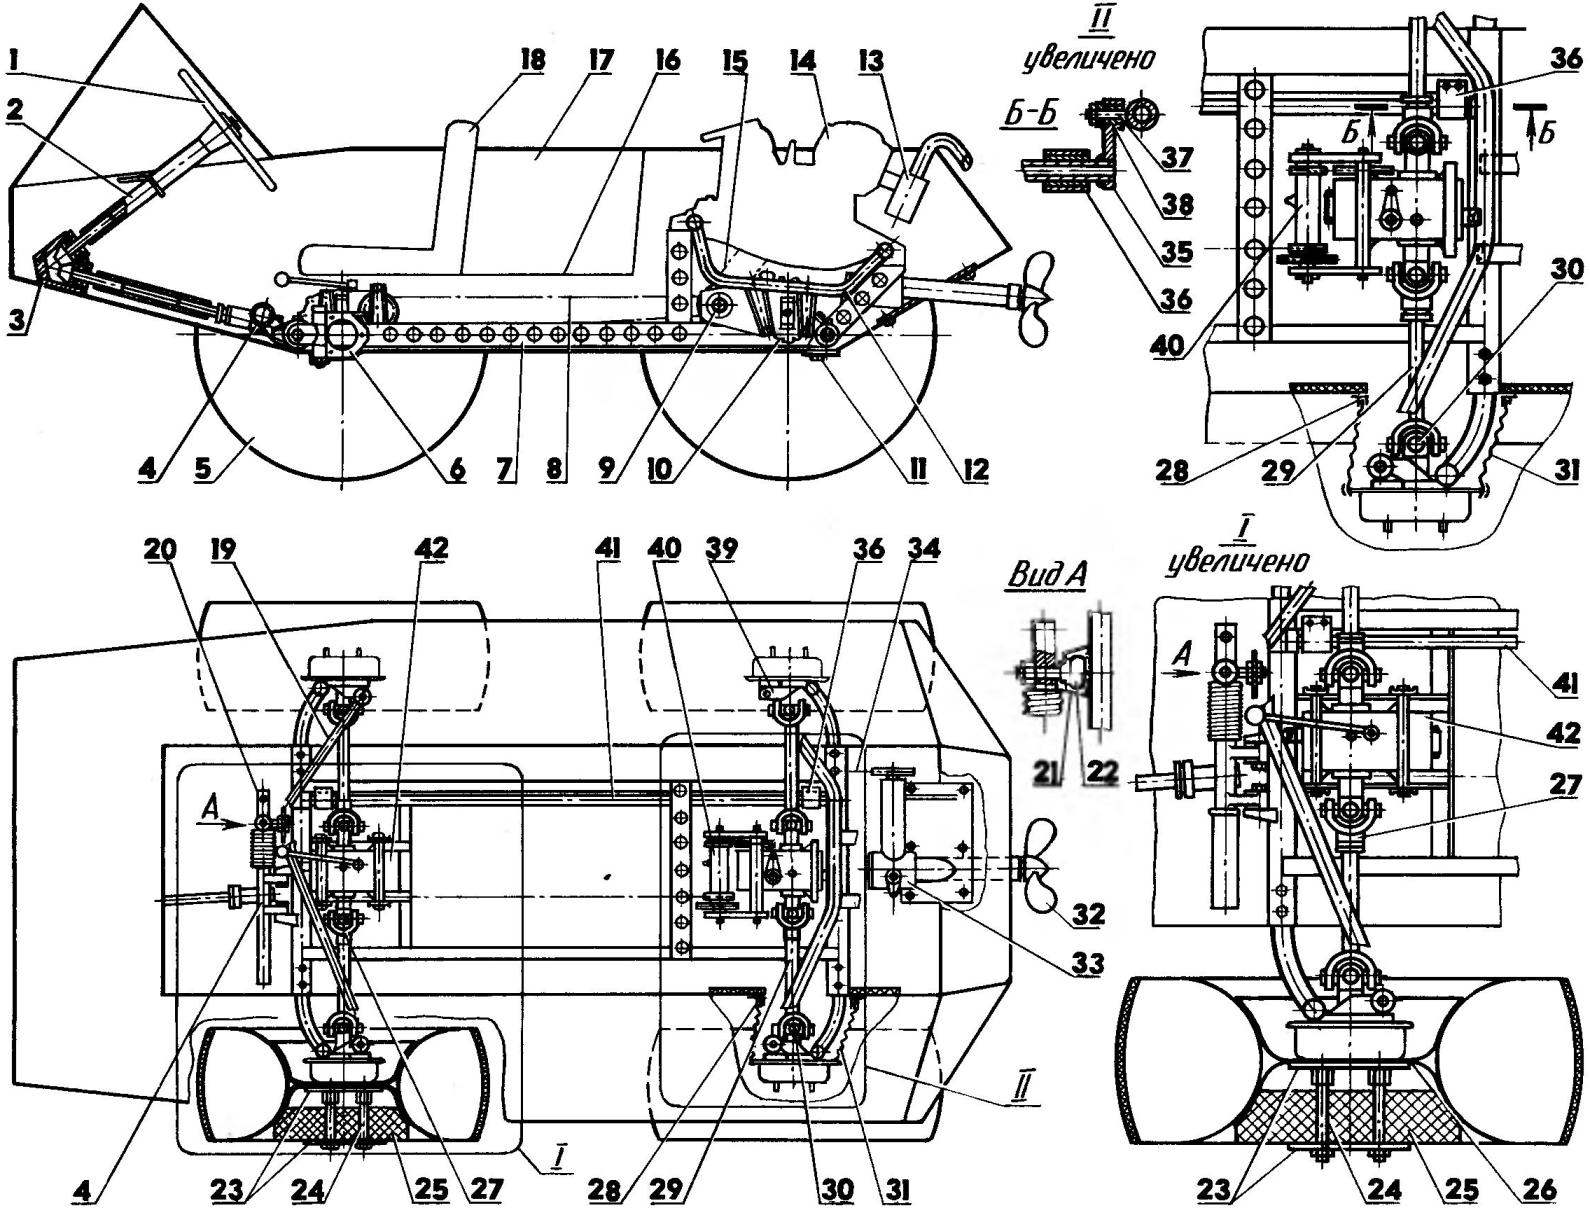 The layout of the vehicle (overhead trunk and fuel tank is not shown)